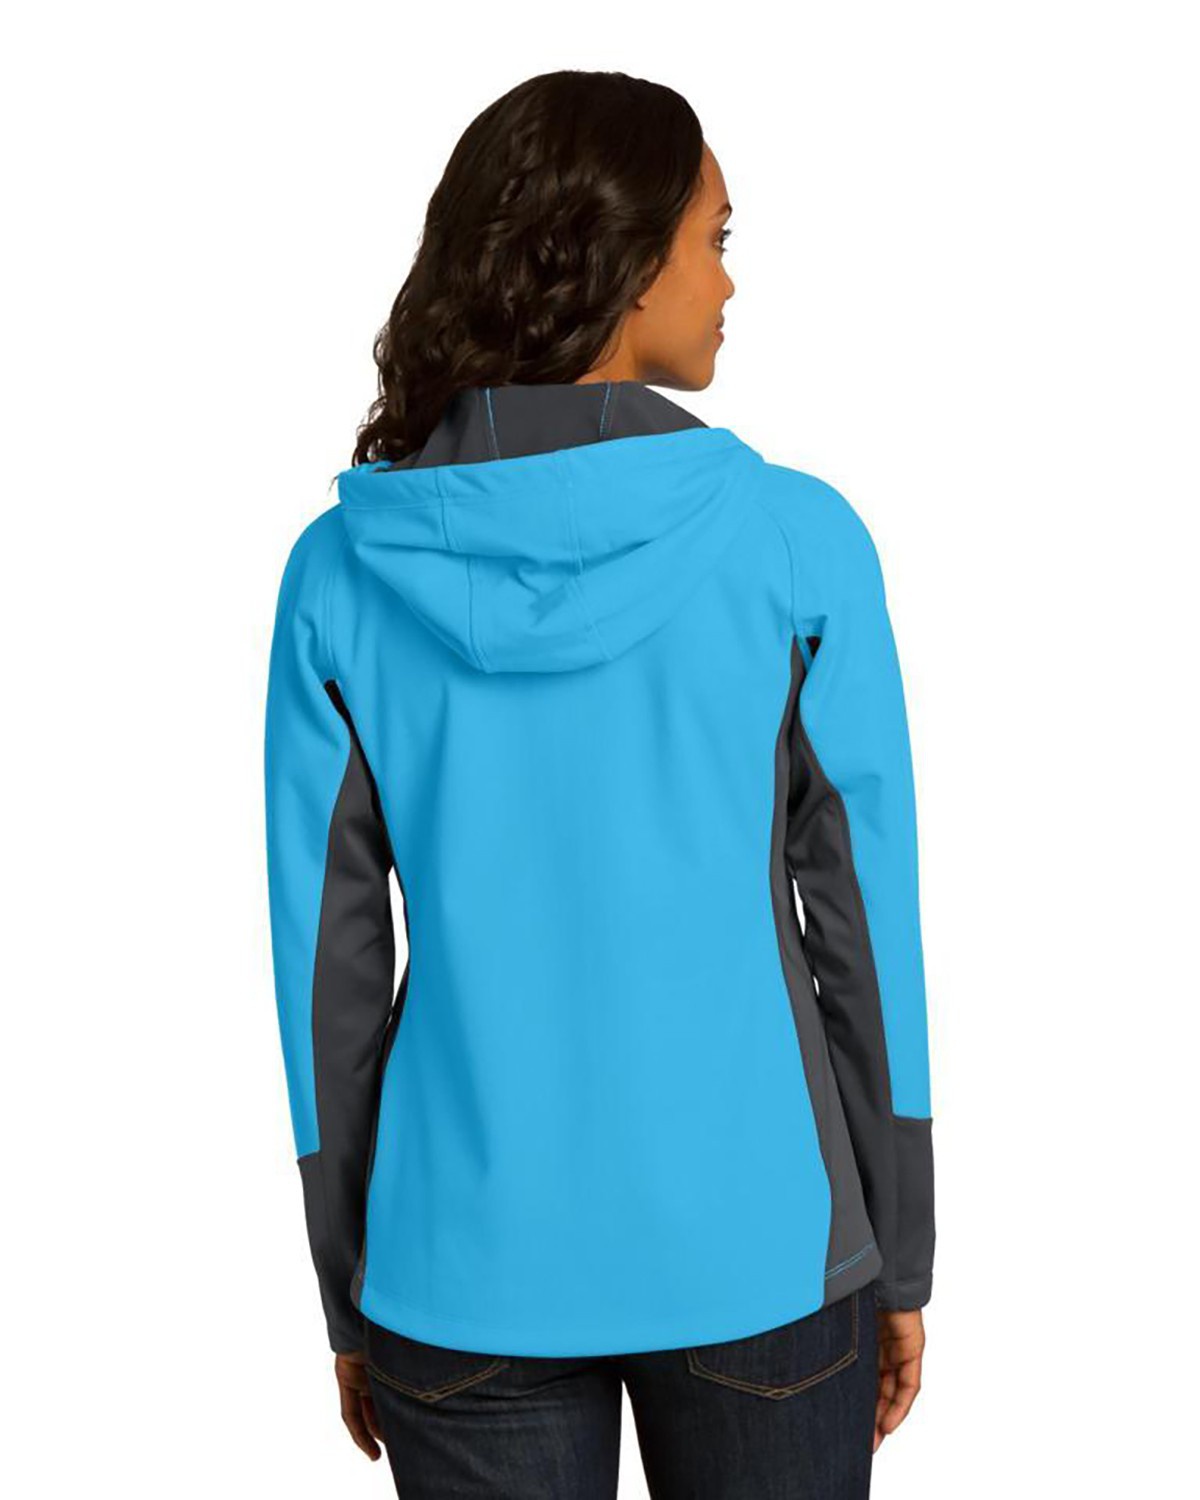 'Port Authority L319 Ladies Vertical Hooded Soft Shell Jacket'